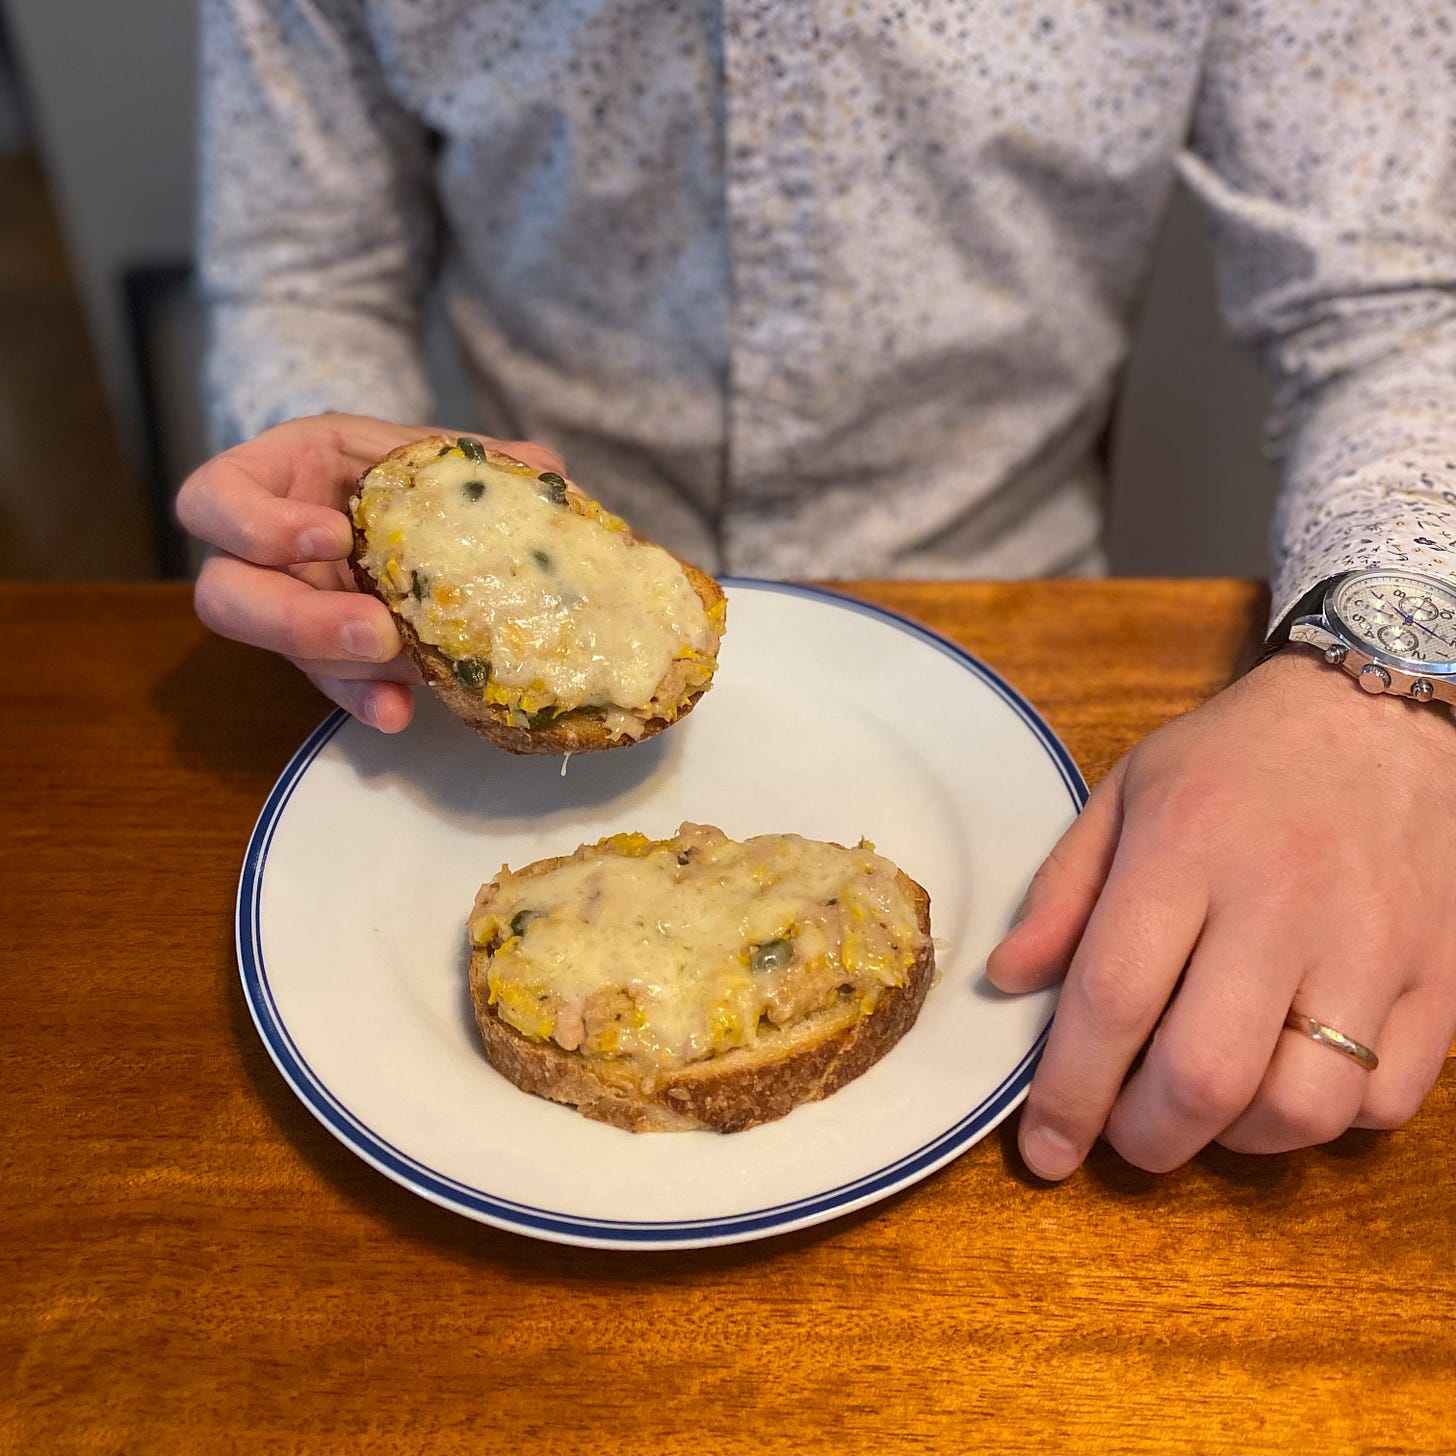 A white and blue side plate with two slices of sourdough, each with the tuna melt described above. One of Jeff's hands rest next to the plate, and the other is holding one of the slices of toast.